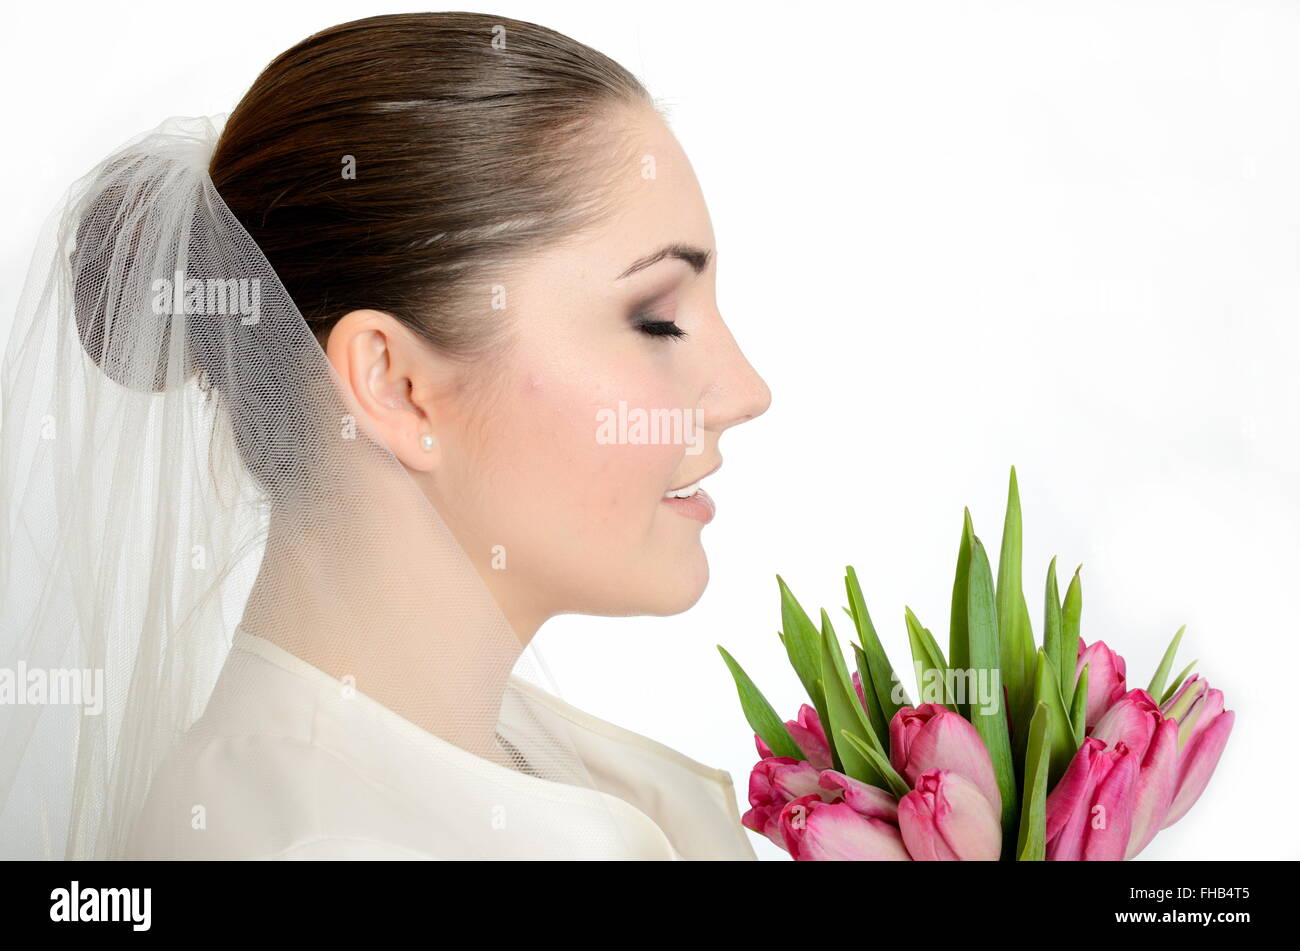 Young bride with white veil. side-face photo of female model with tulips. Stock Photo